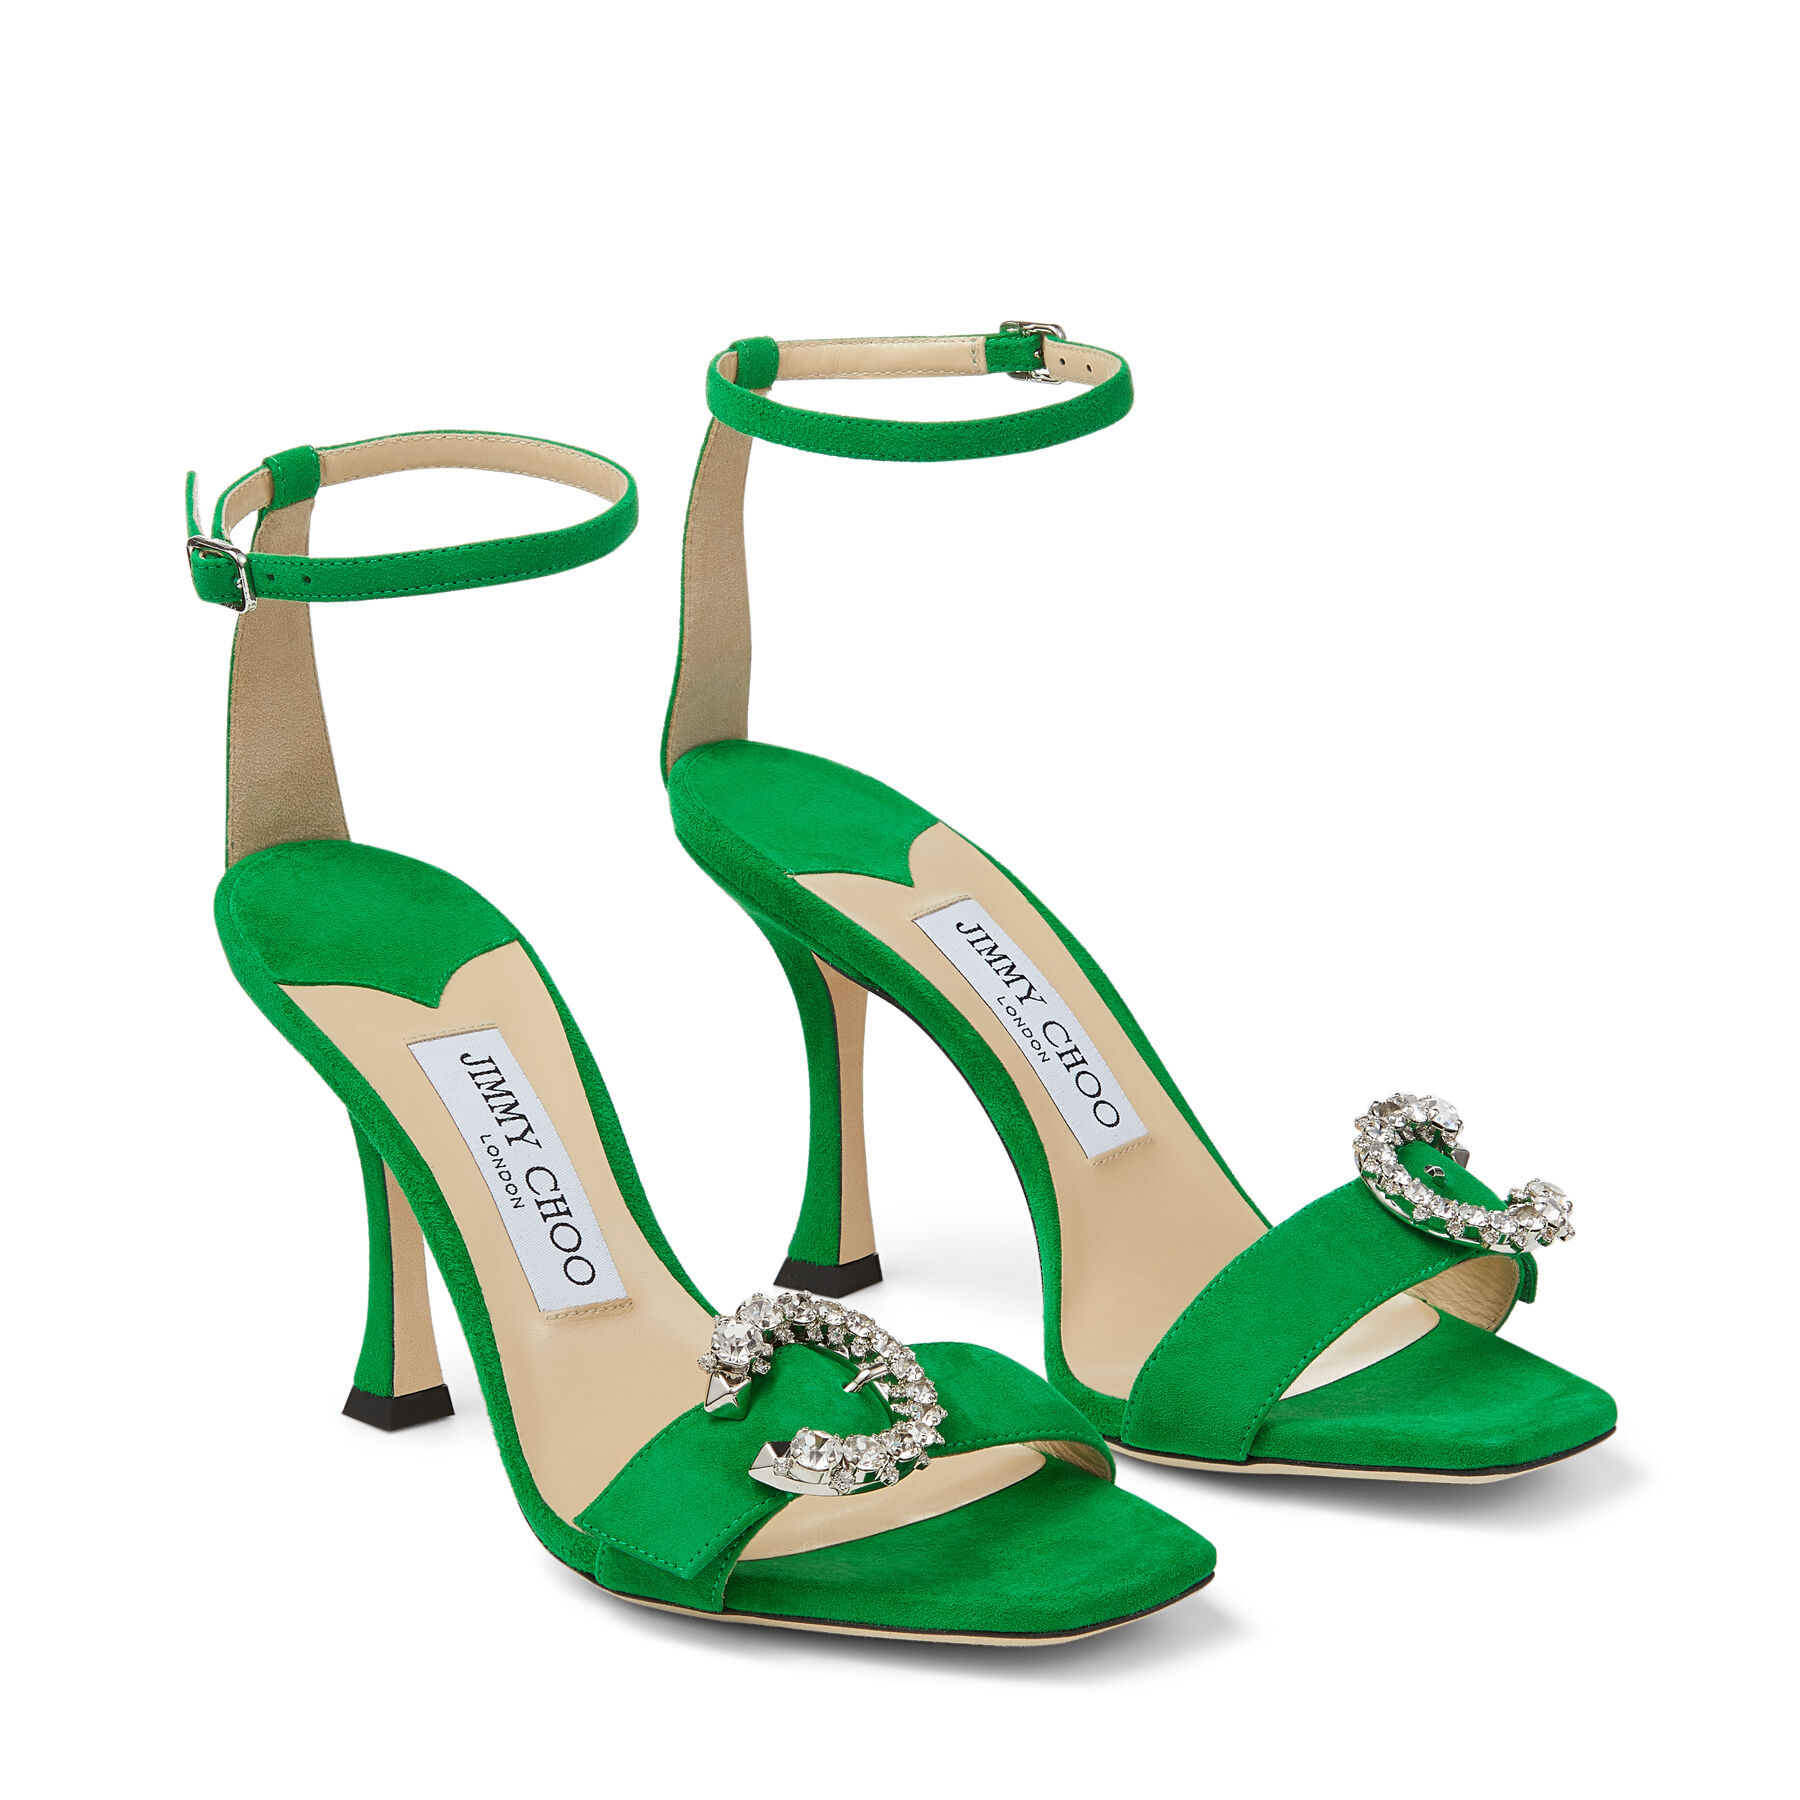 Malachite Suede Sandals with Crystal Buckle | MARSAI 90 | High 